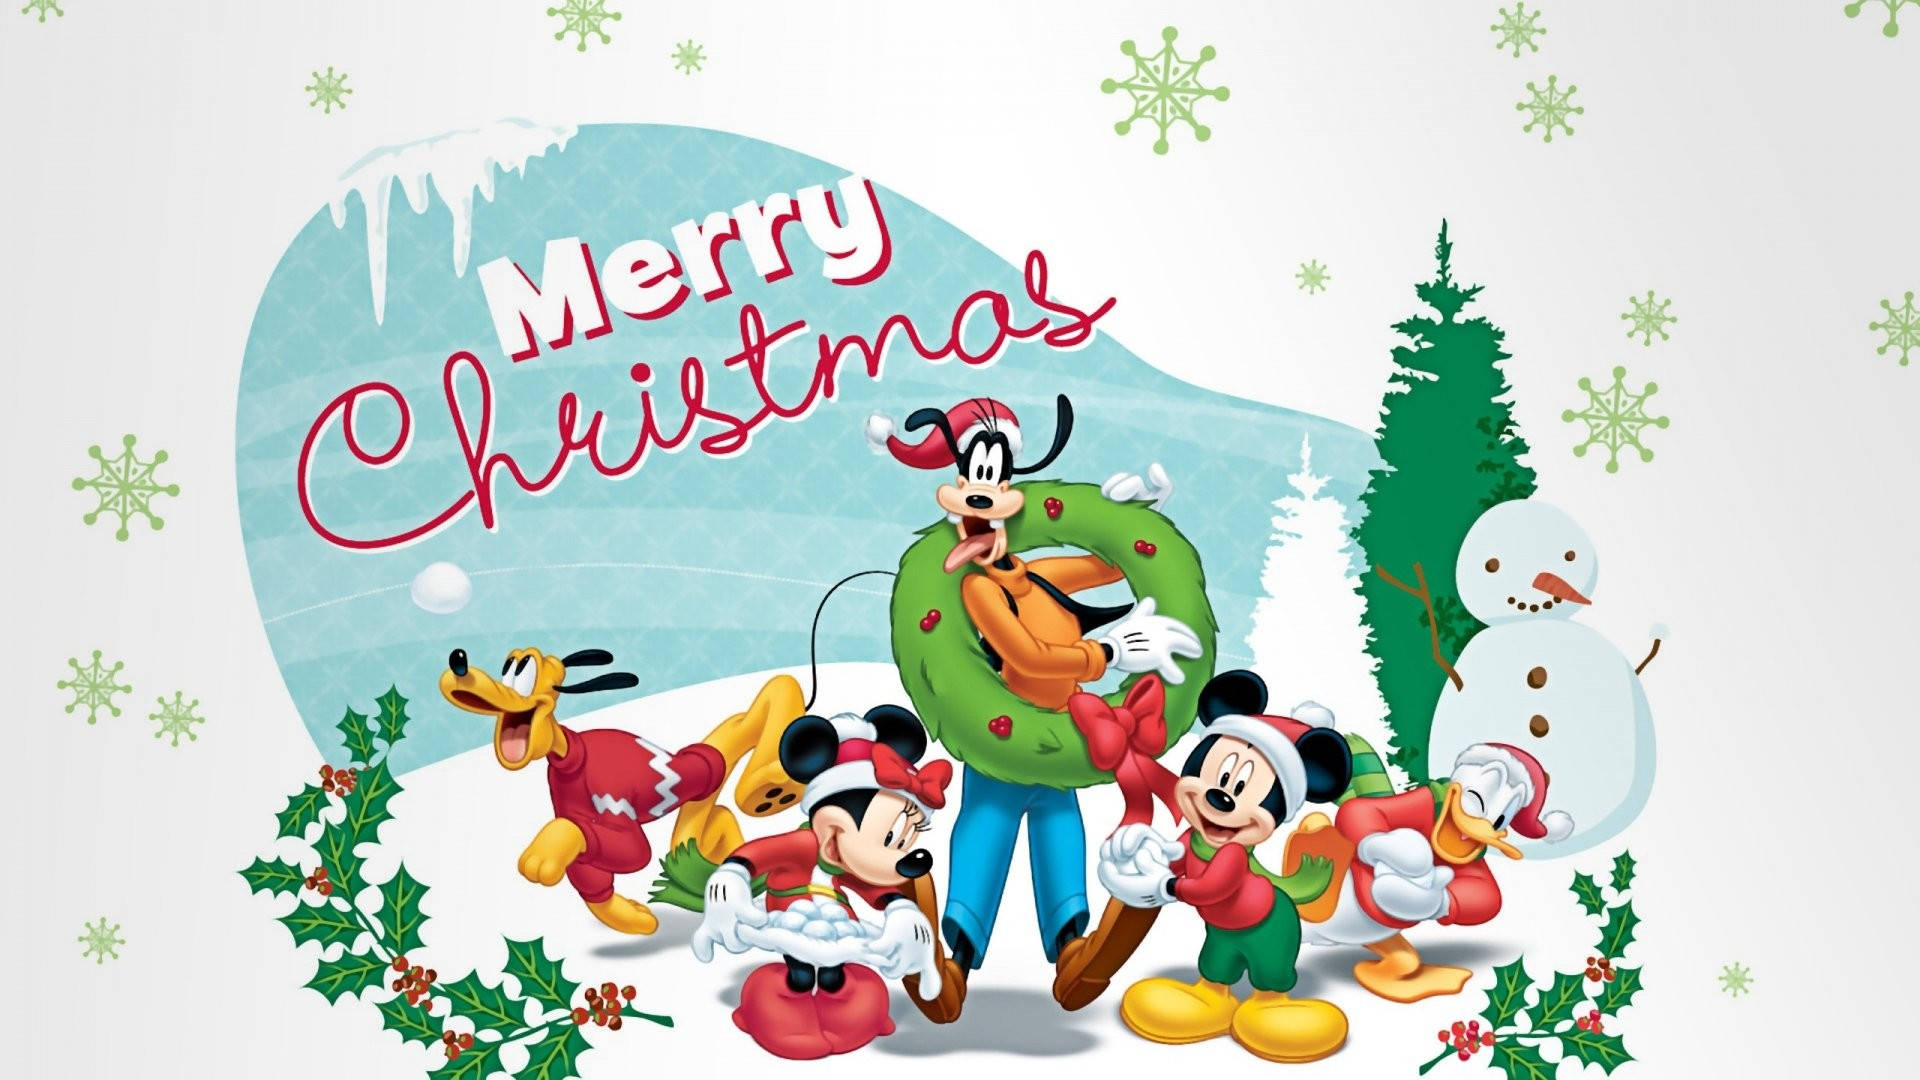 Funny Christmas Poster With Mickey Mouse Wallpaper